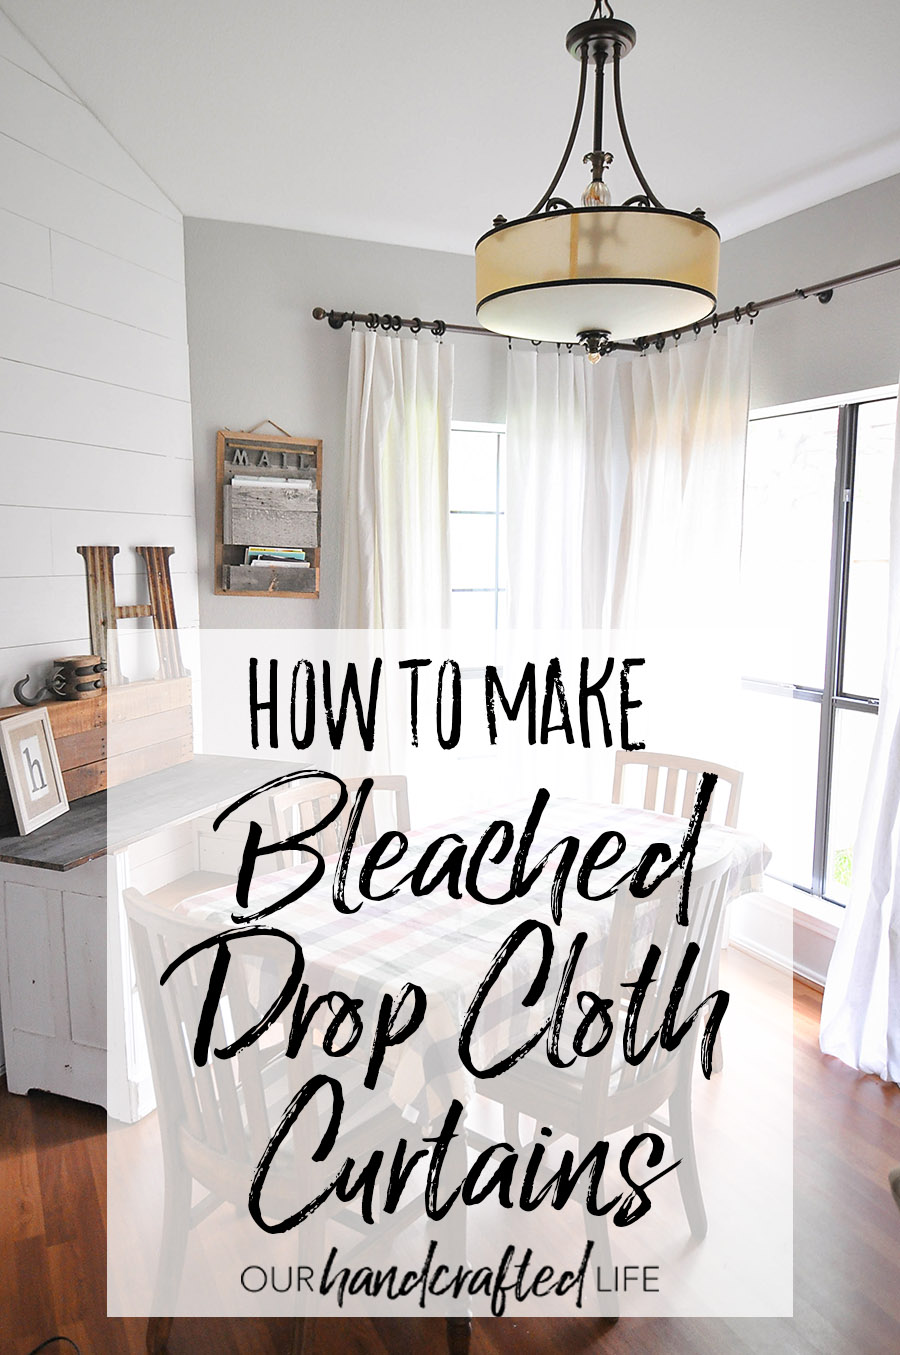 How to Make No-Sew Bleached Drop Cloth Curtains - Our Handcrafted Life - How to Make No-Sew Bleached Drop Cloth Curtains - Our Handcrafted Life -   18 diy Home Decor curtains ideas